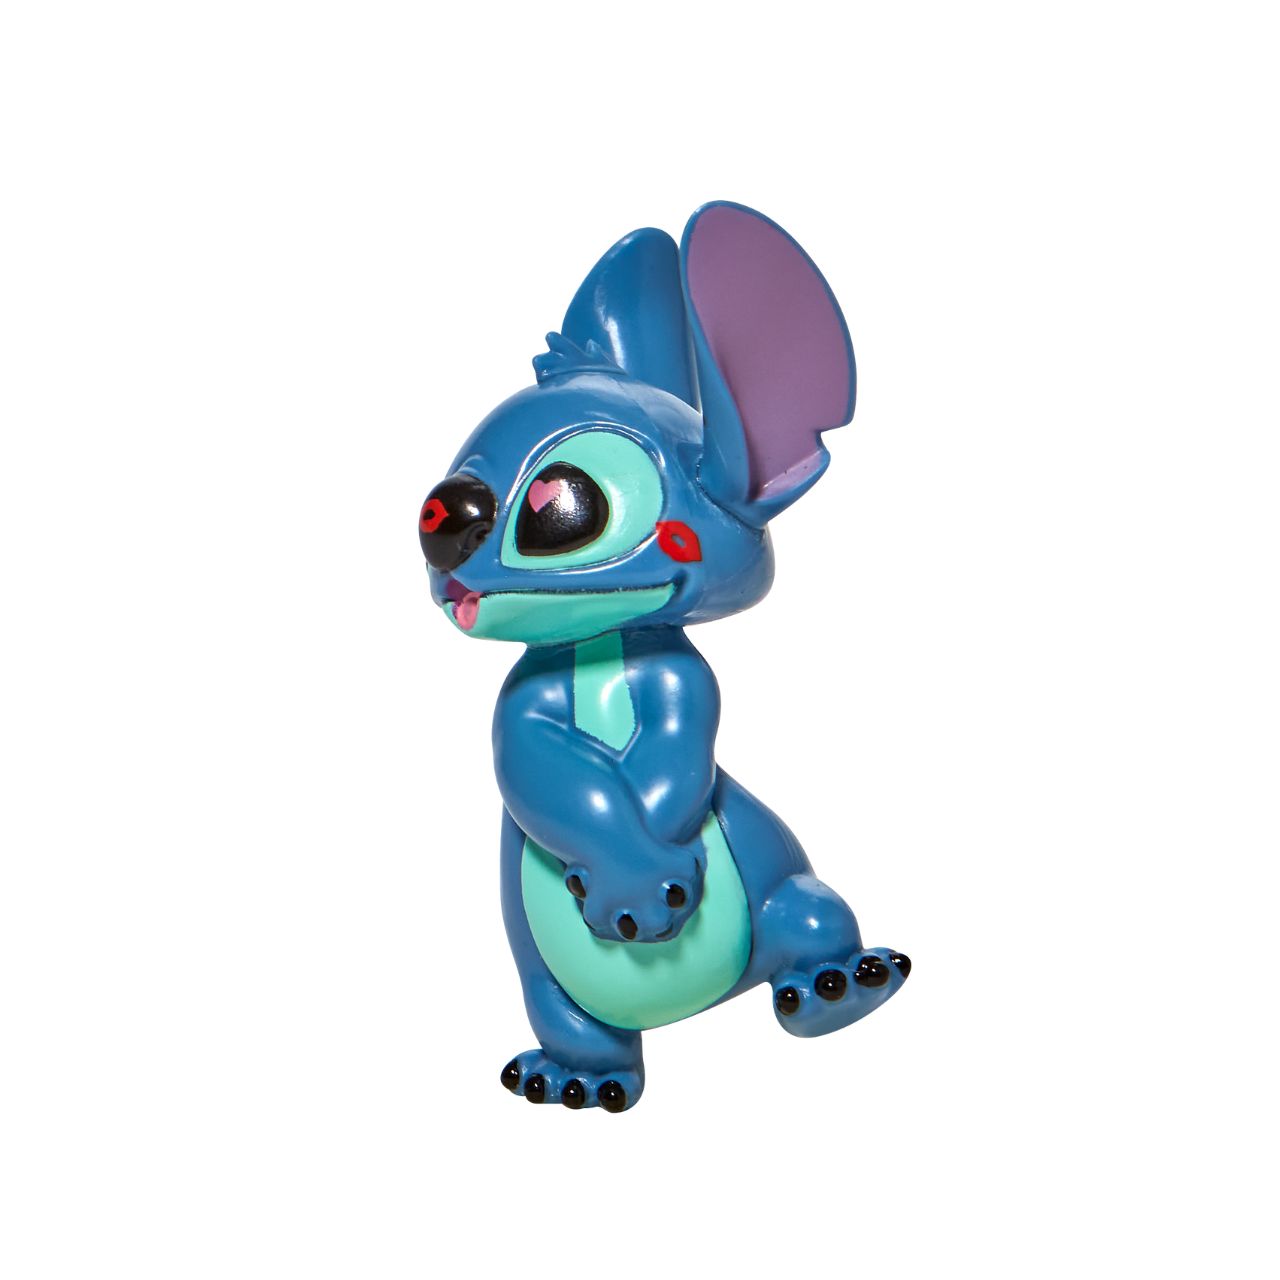 Grand Jester Stitch Covered in Kisses Mini Figurine  This super cute Stitch has been covered in lipstick kisses and looks loved up. He is made from high quality vinyl and is the perfect addition to any Stitch fans collection or bought as a gift for a birthday, Valentines or as a little treat.